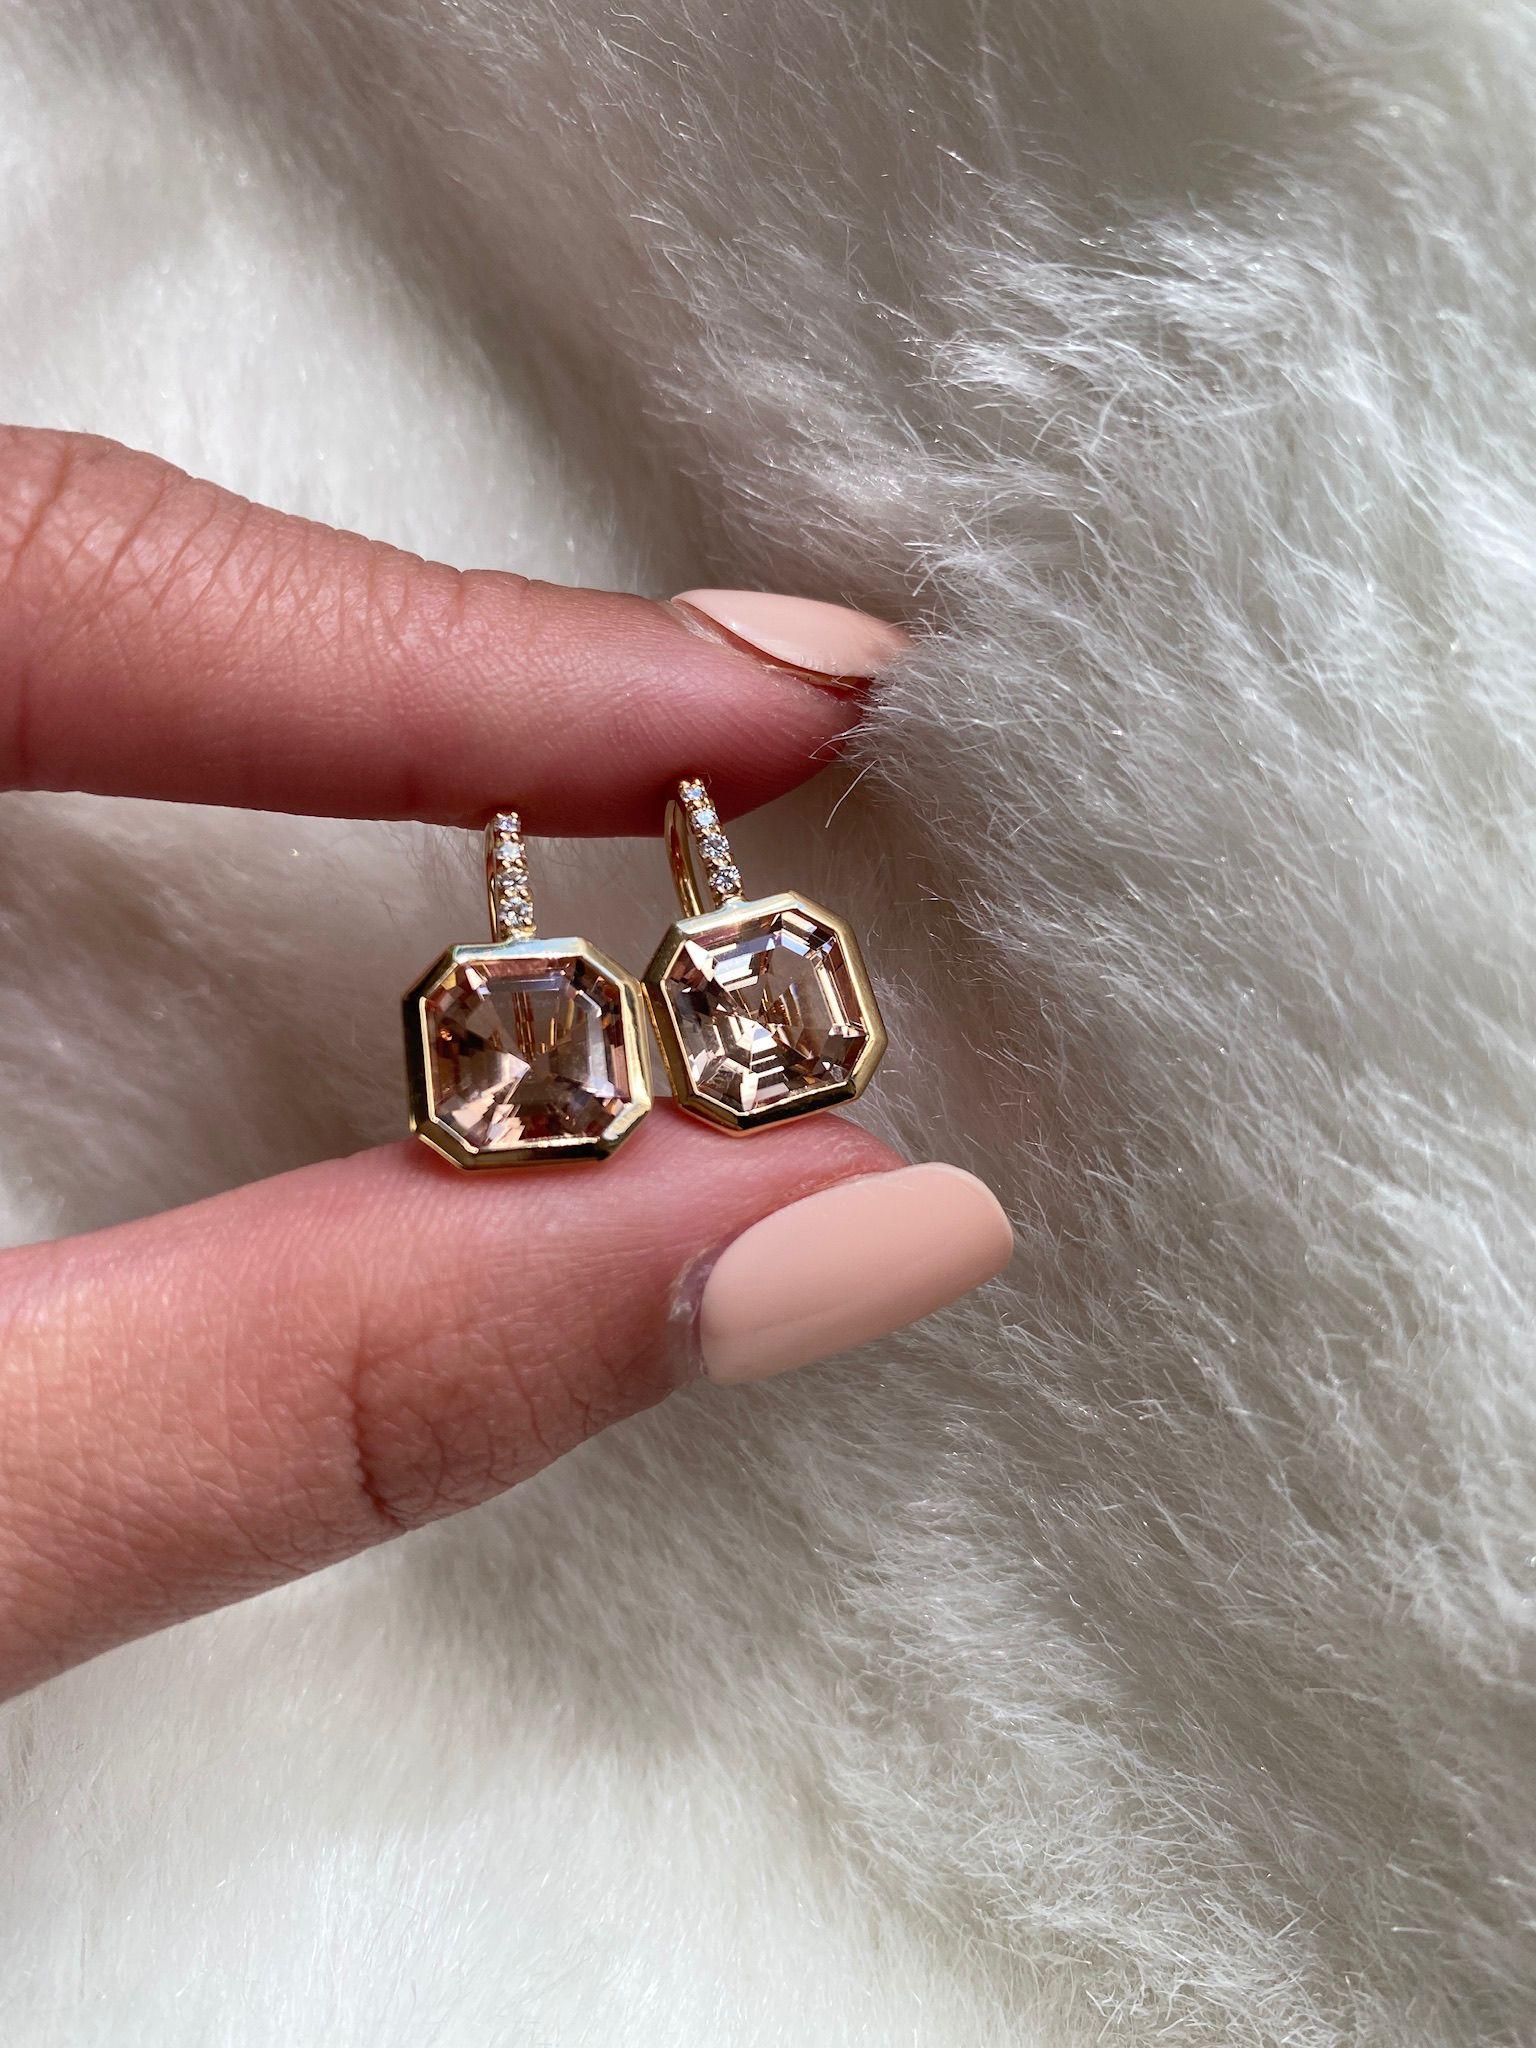 Elevate your style with these exquisite earrings featuring a stunning 9 x 9 mm Asscher-Cut Morganite gemstone. Expertly set on a delicate wire of 18K Gold, these earrings are adorned with four dazzling Diamonds, adding a touch of luxury and sparkle